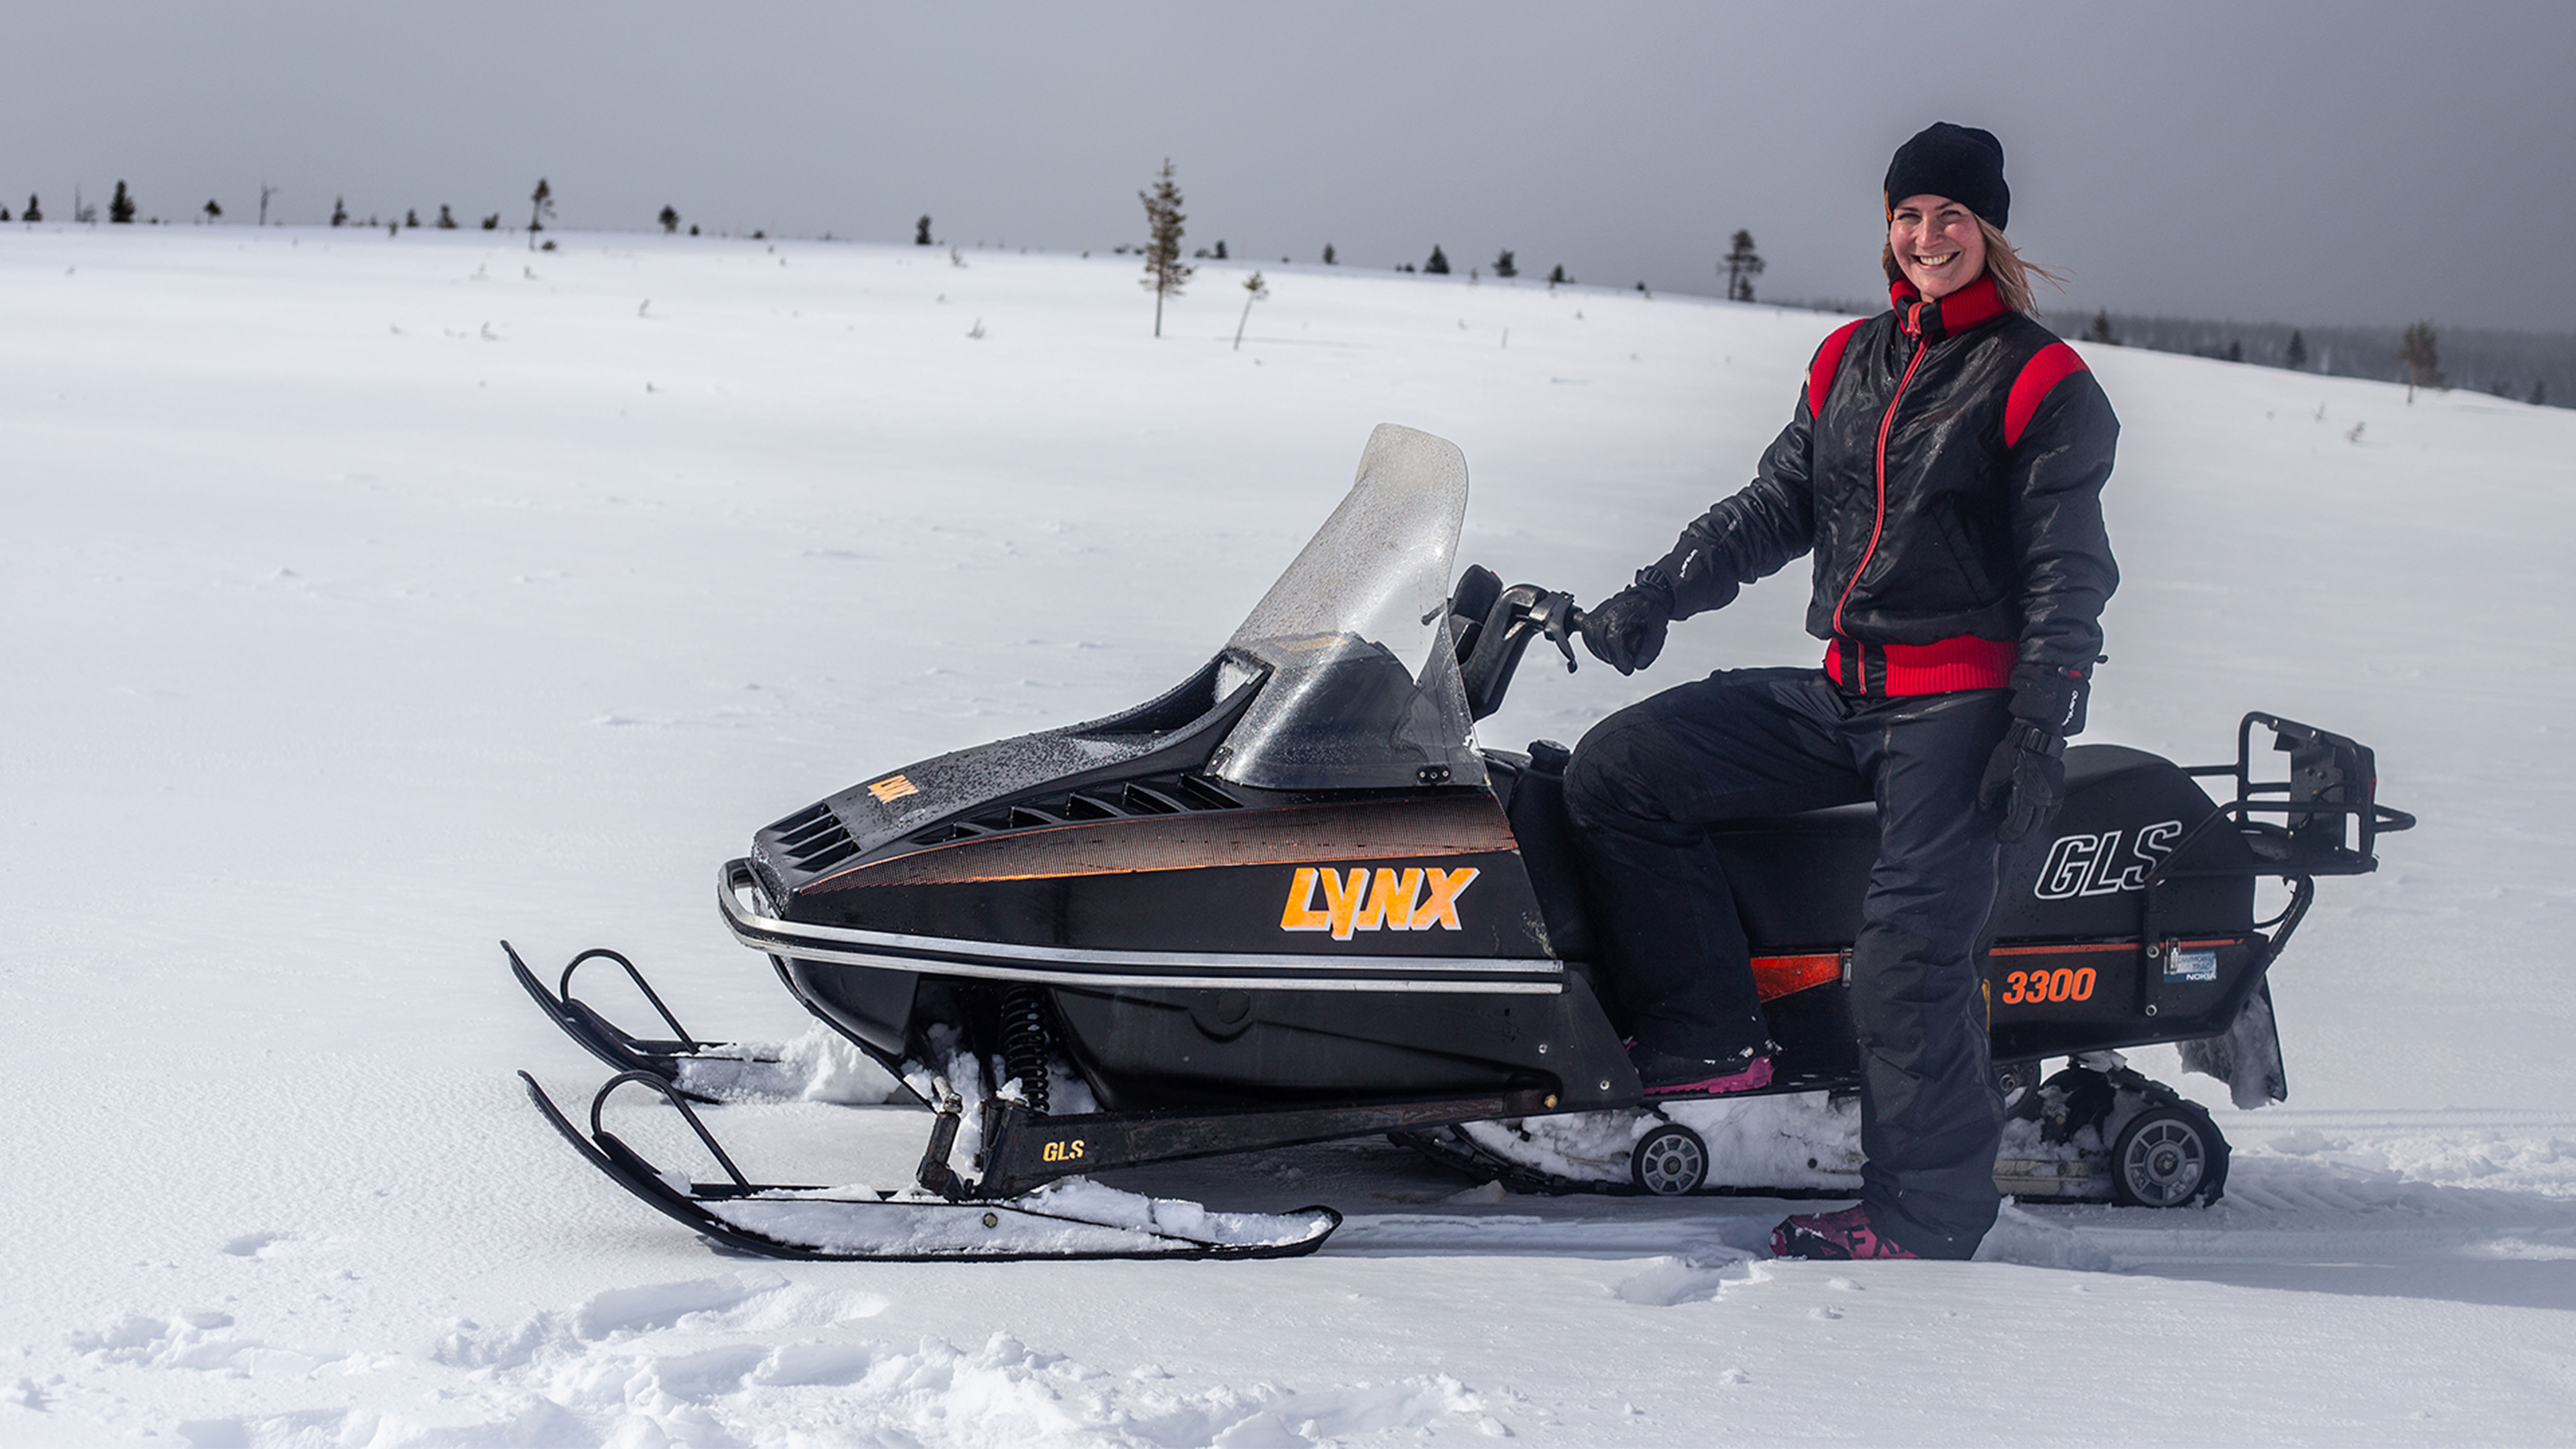 Woman smiling and standing next to Lynx GLS 3300 snowmobile on the fells